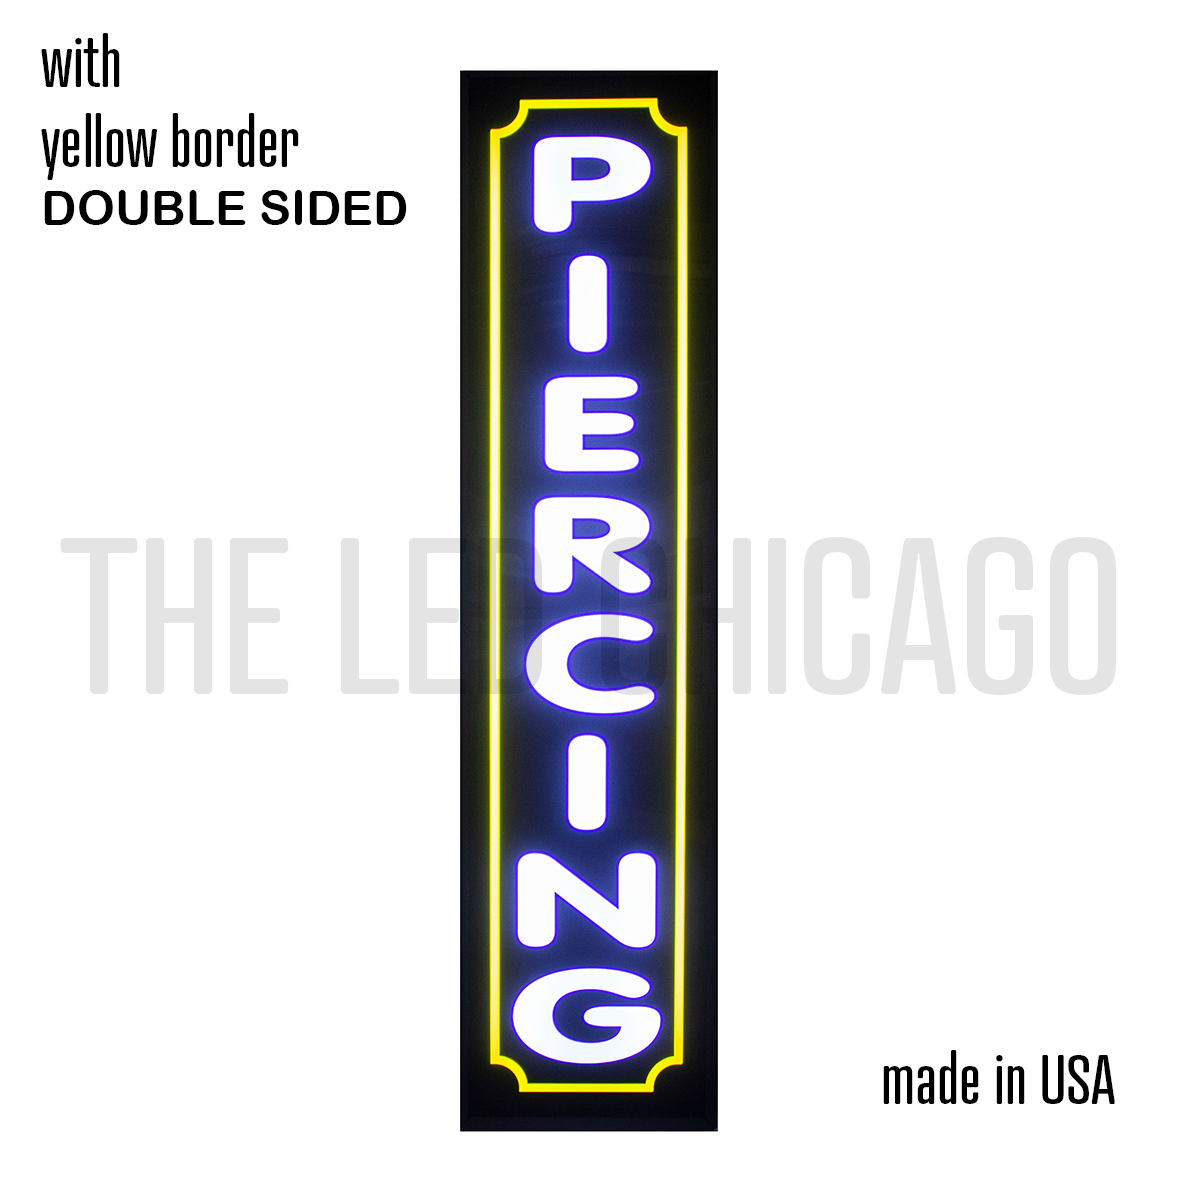 Piercing Double-sided with yellow border